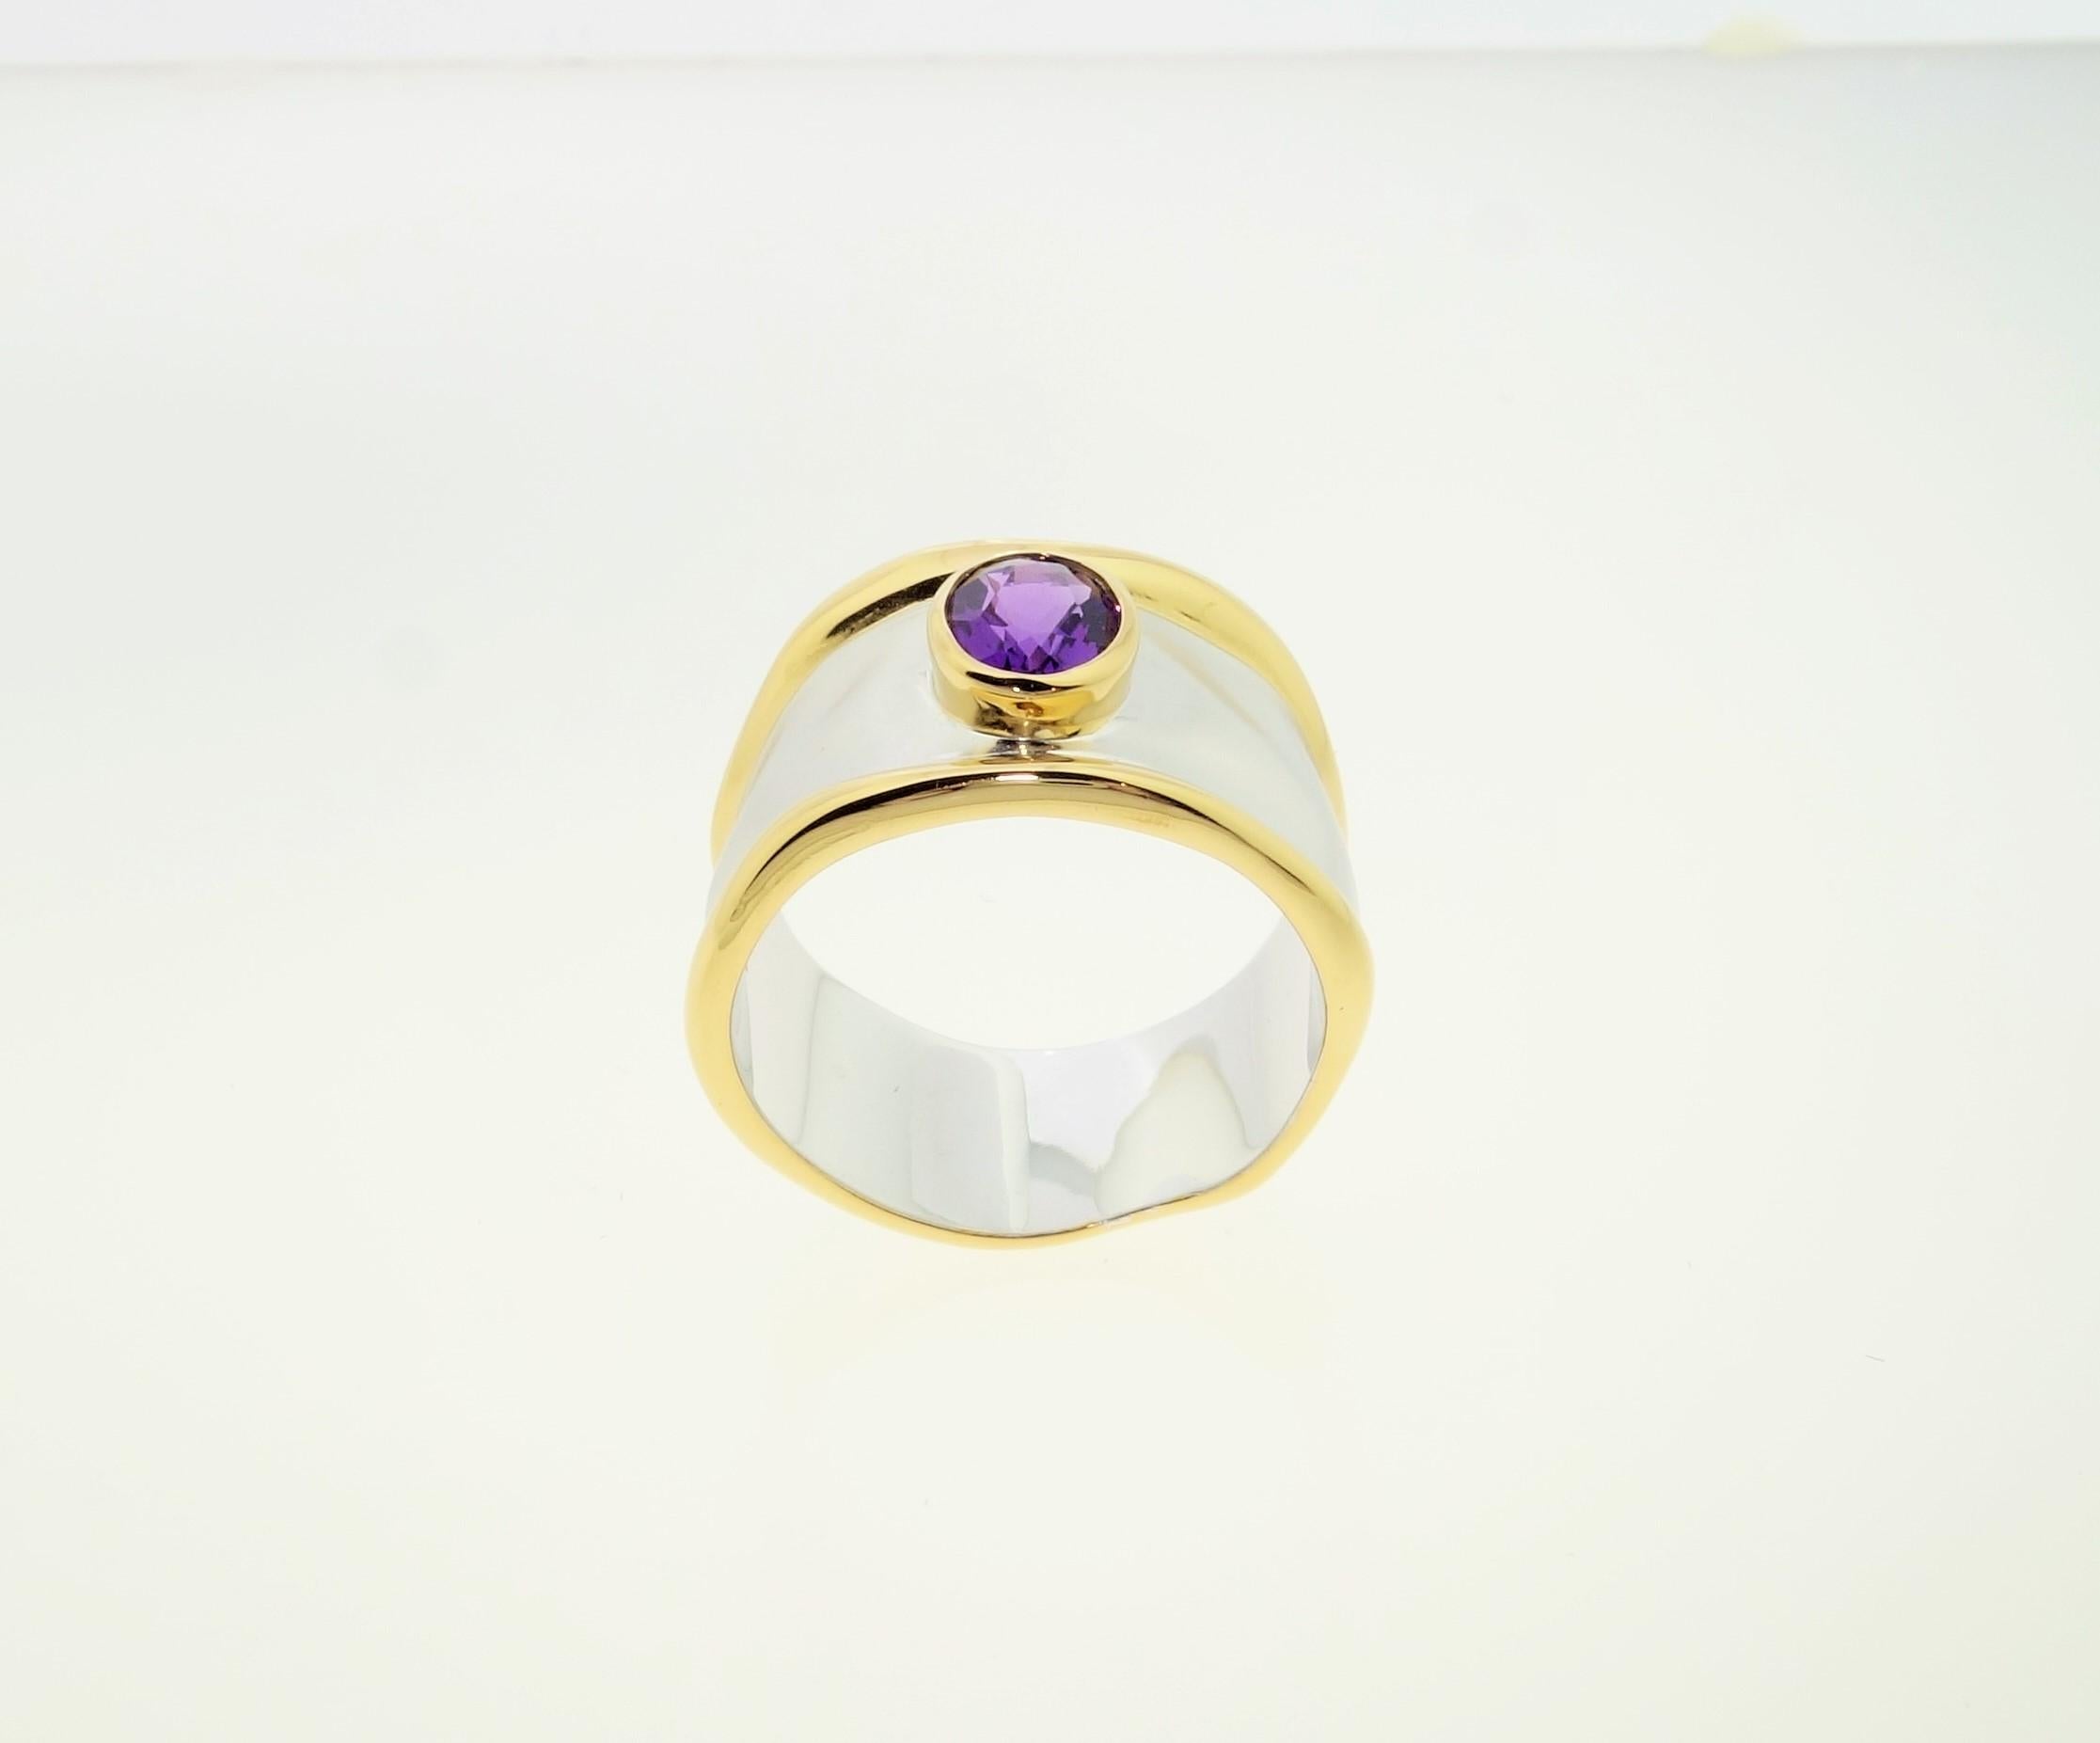 Beautiful Solitaire Cocktail Ring featuring an oval Amethyst; approx. 0.59 carat; approx. stone size: 6mm x 5mm. Sterling Silver Tarnish-resistant Rhodium and gold plated accents on either side of mounting. Size 7. Classic and Chic…illuminating your